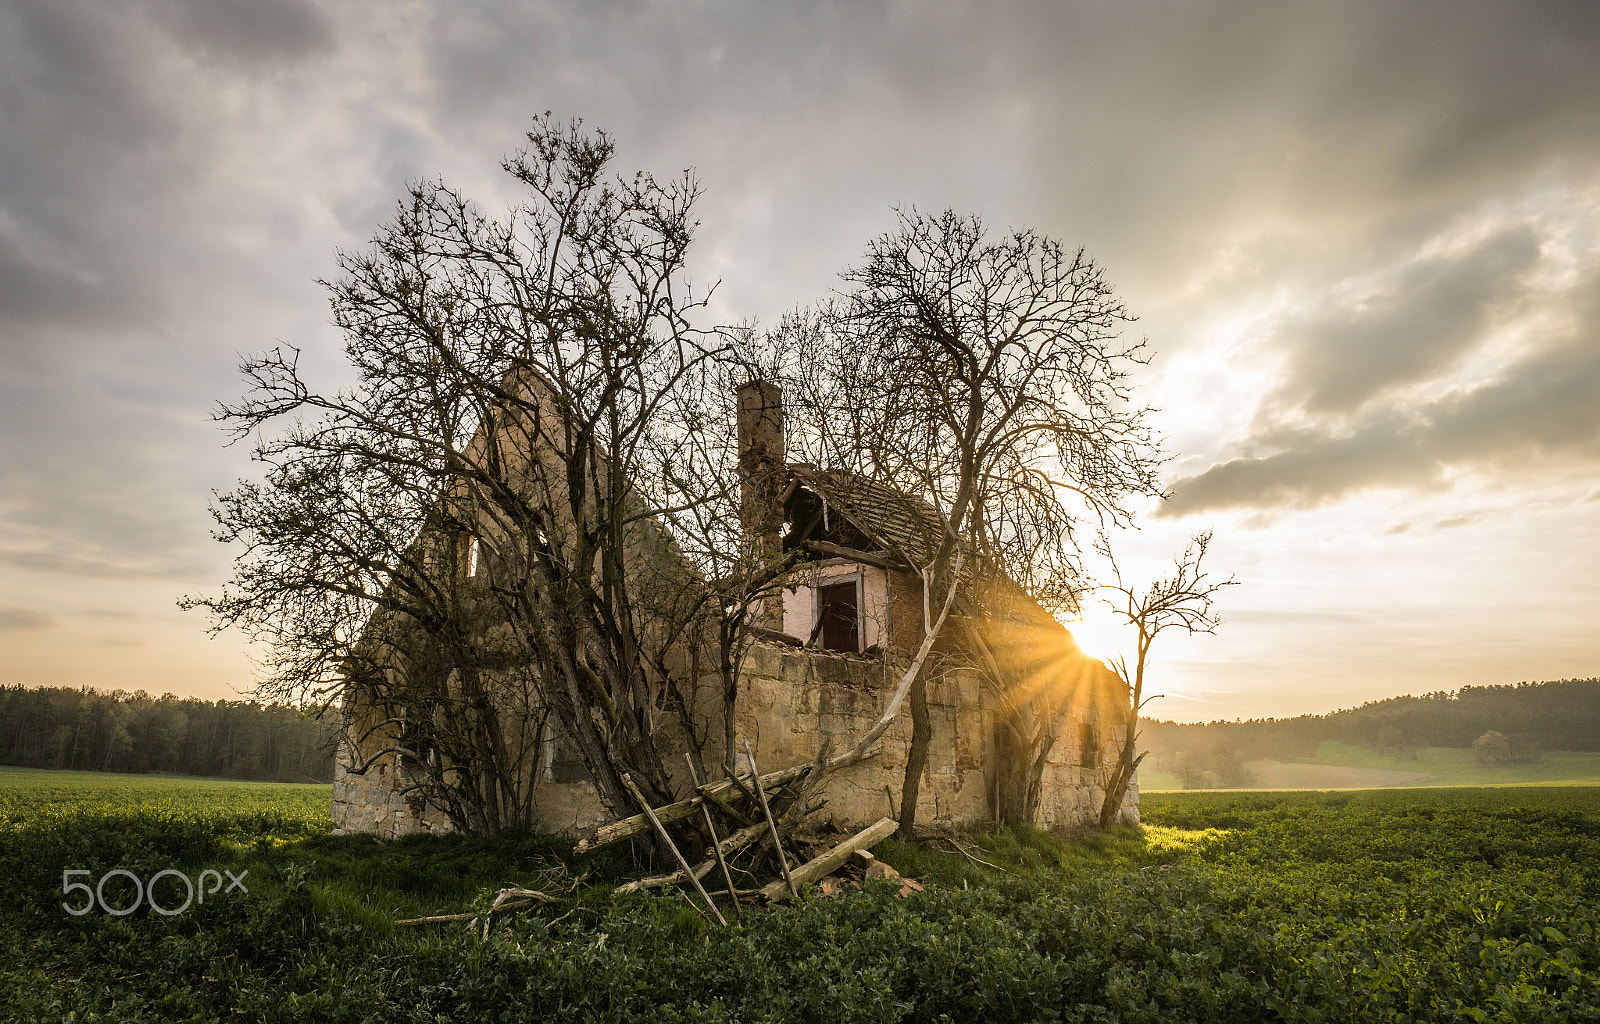 Sony a6000 sample photo. The old house in the meadow photography